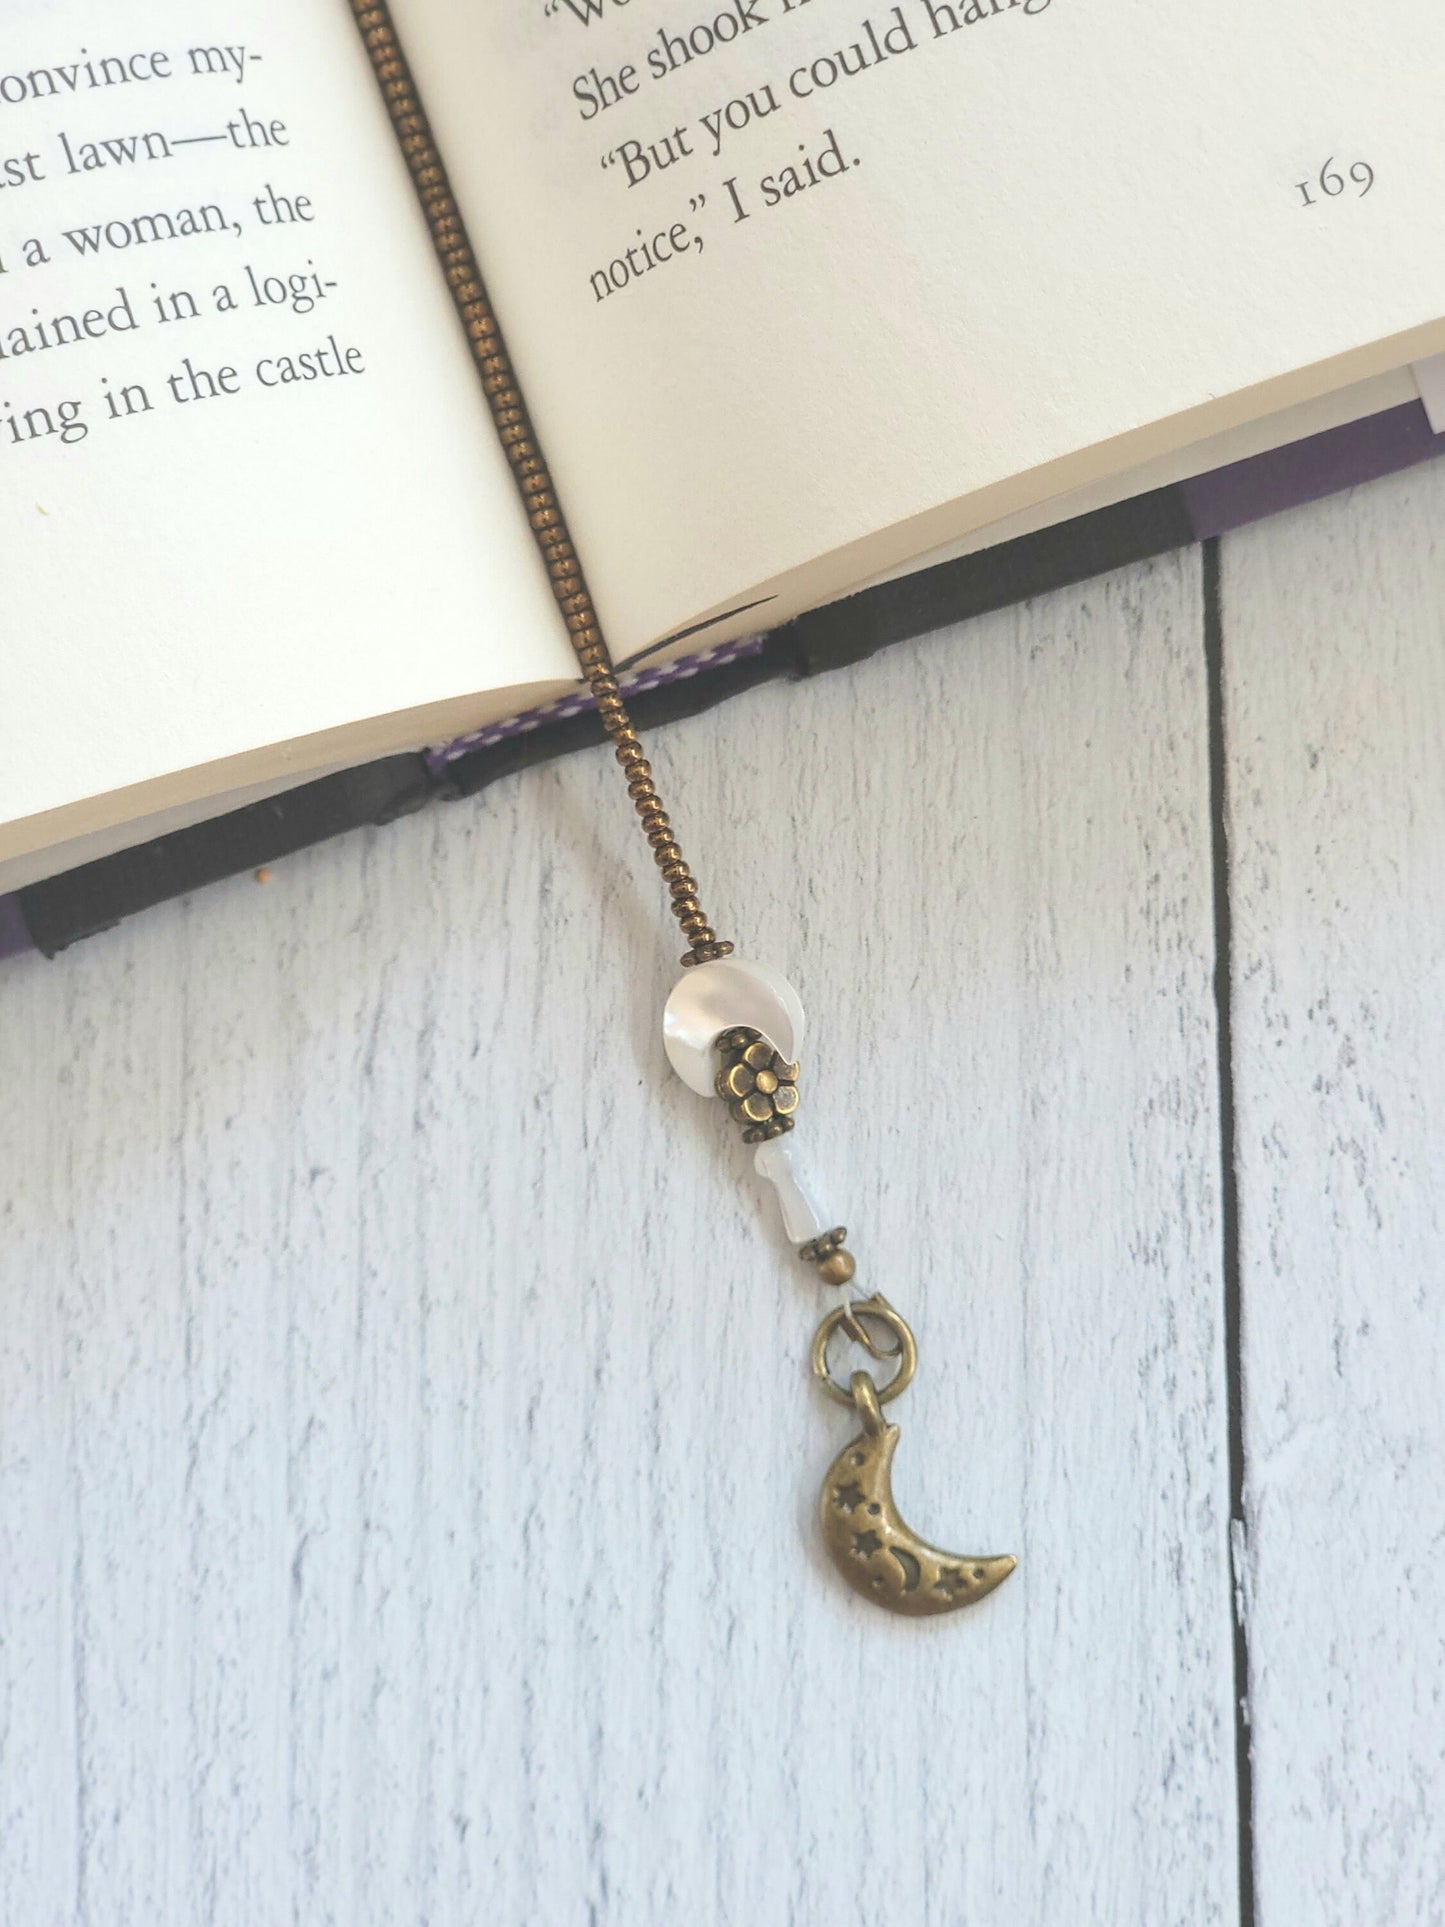 Whimsical Beaded Bookmark with Moon and Mushroom Design, Choose Your Color